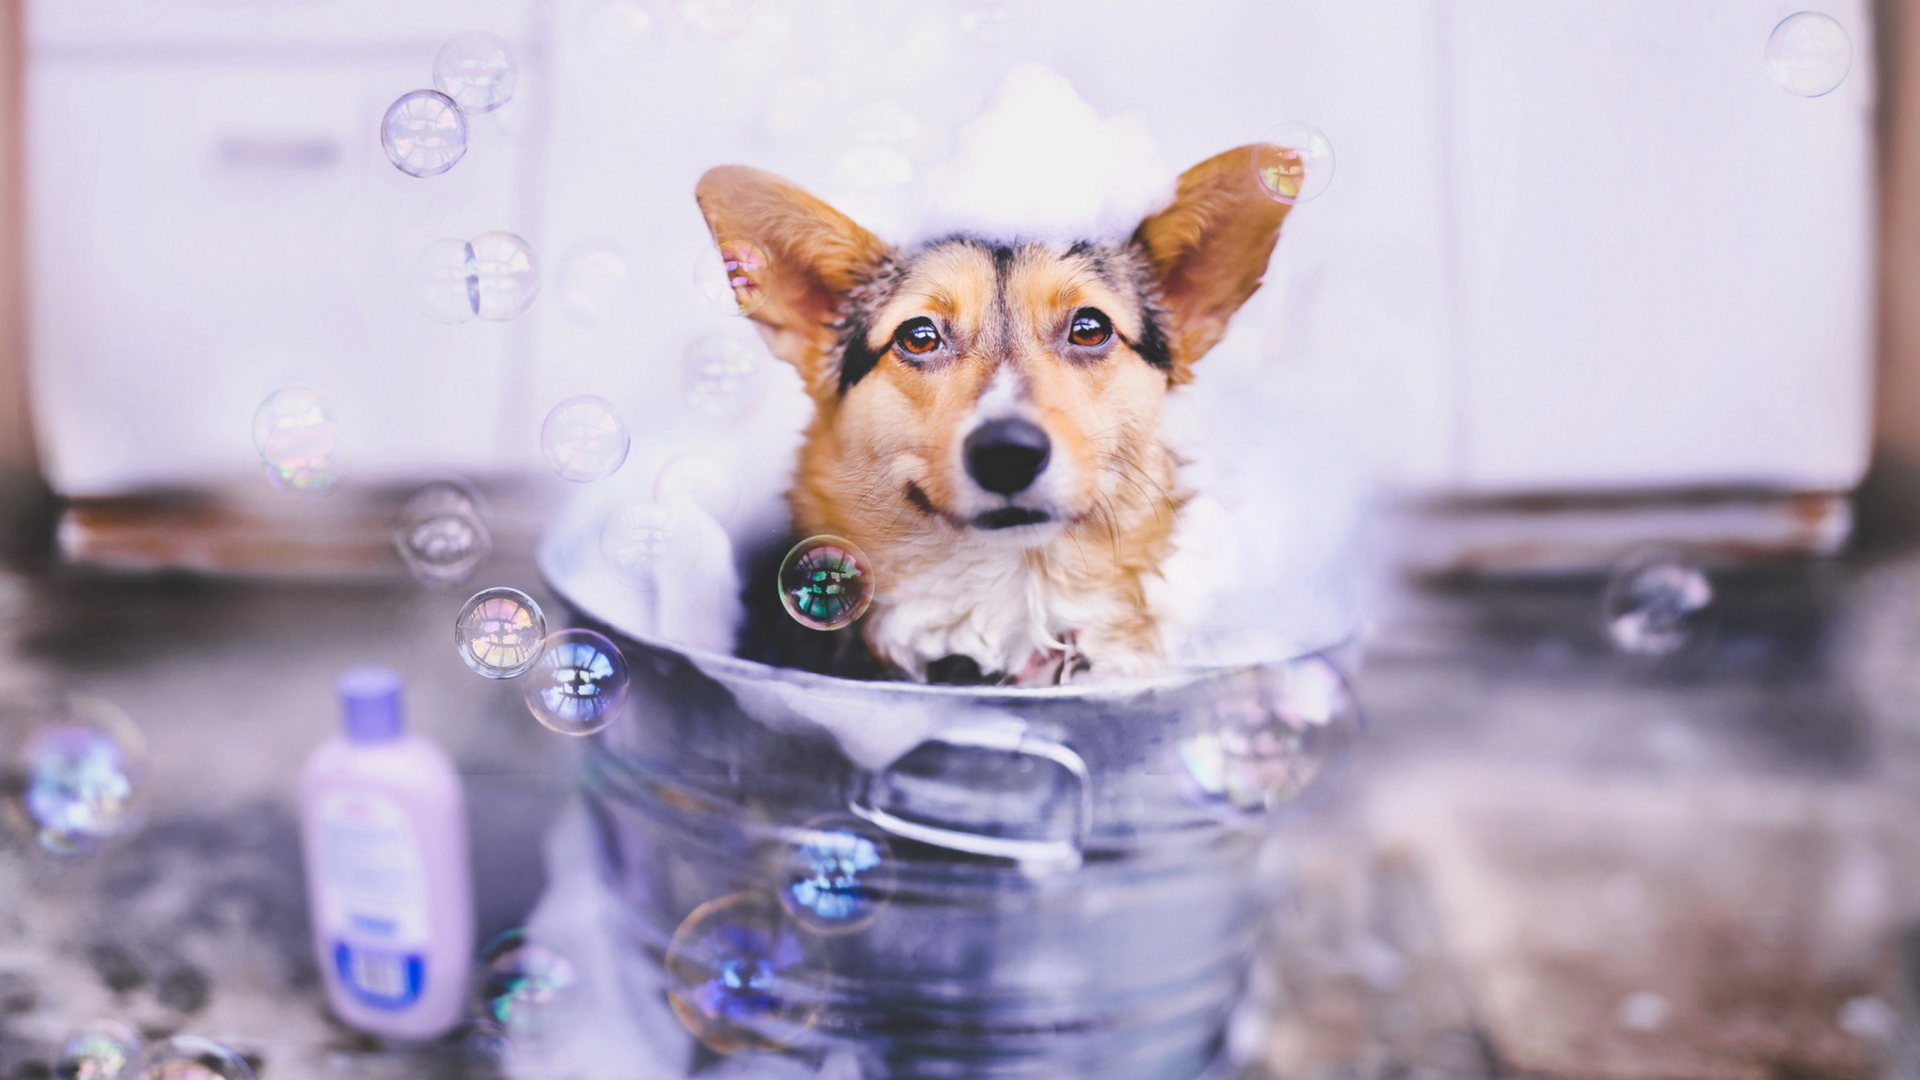 Dog And Bubbles wallpaper 1920x1080